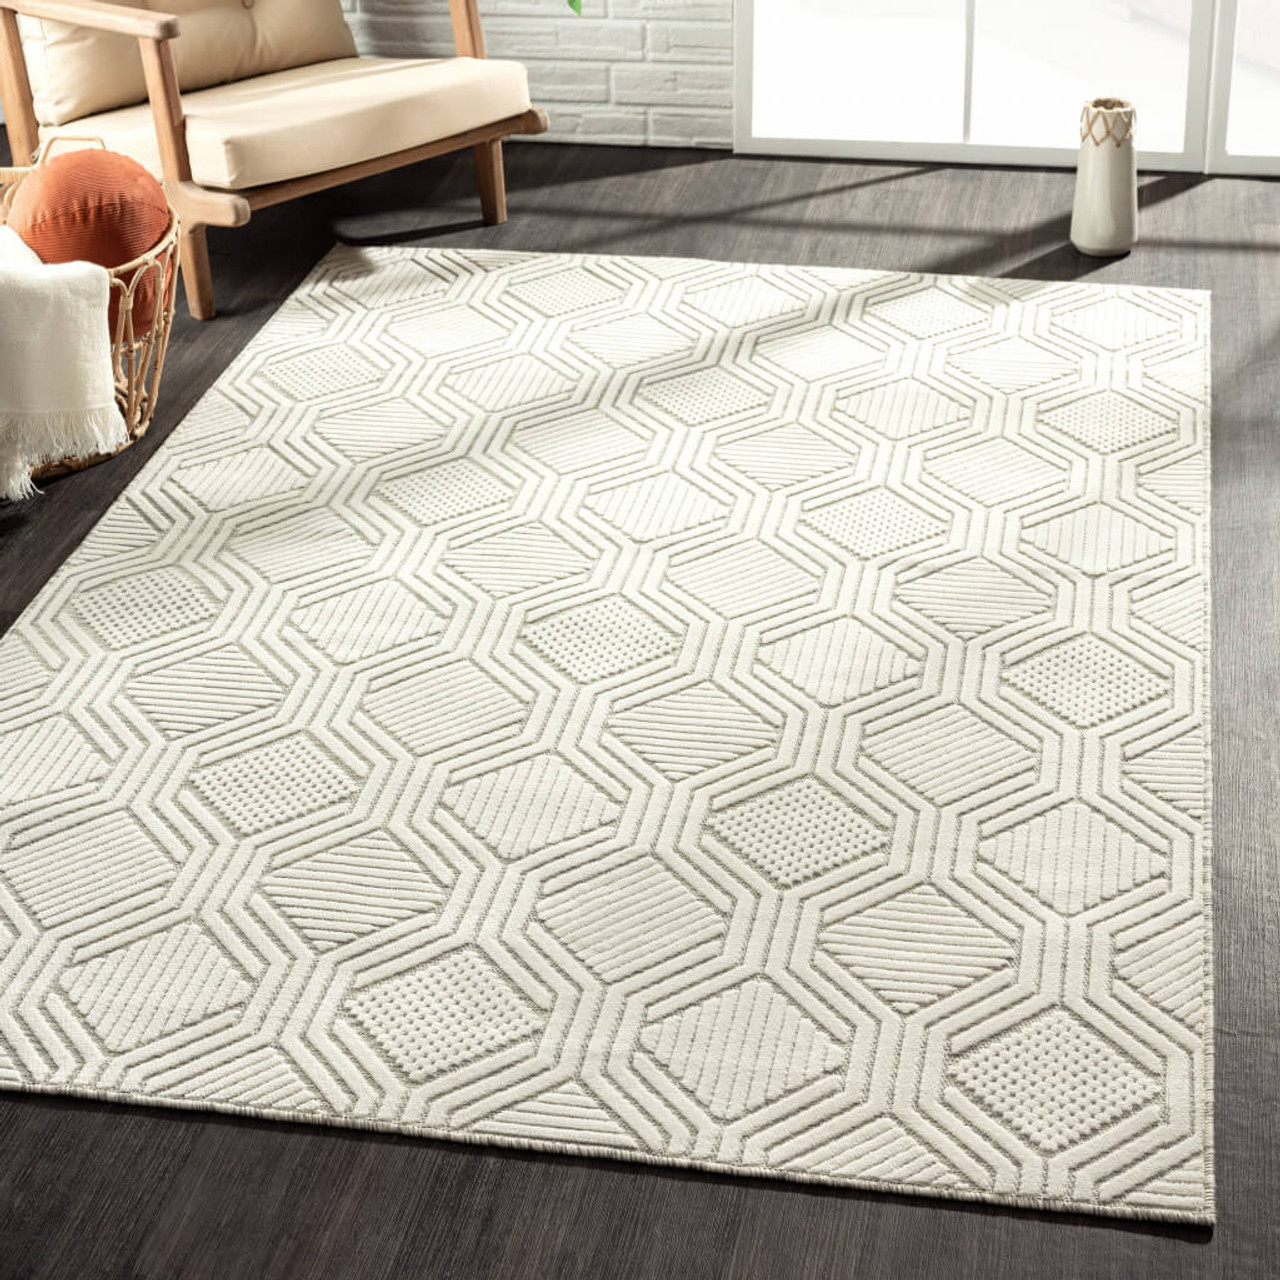 8' X 10' Gray And Ivory Geometric Stain Resistant Indoor Outdoor Area Rug